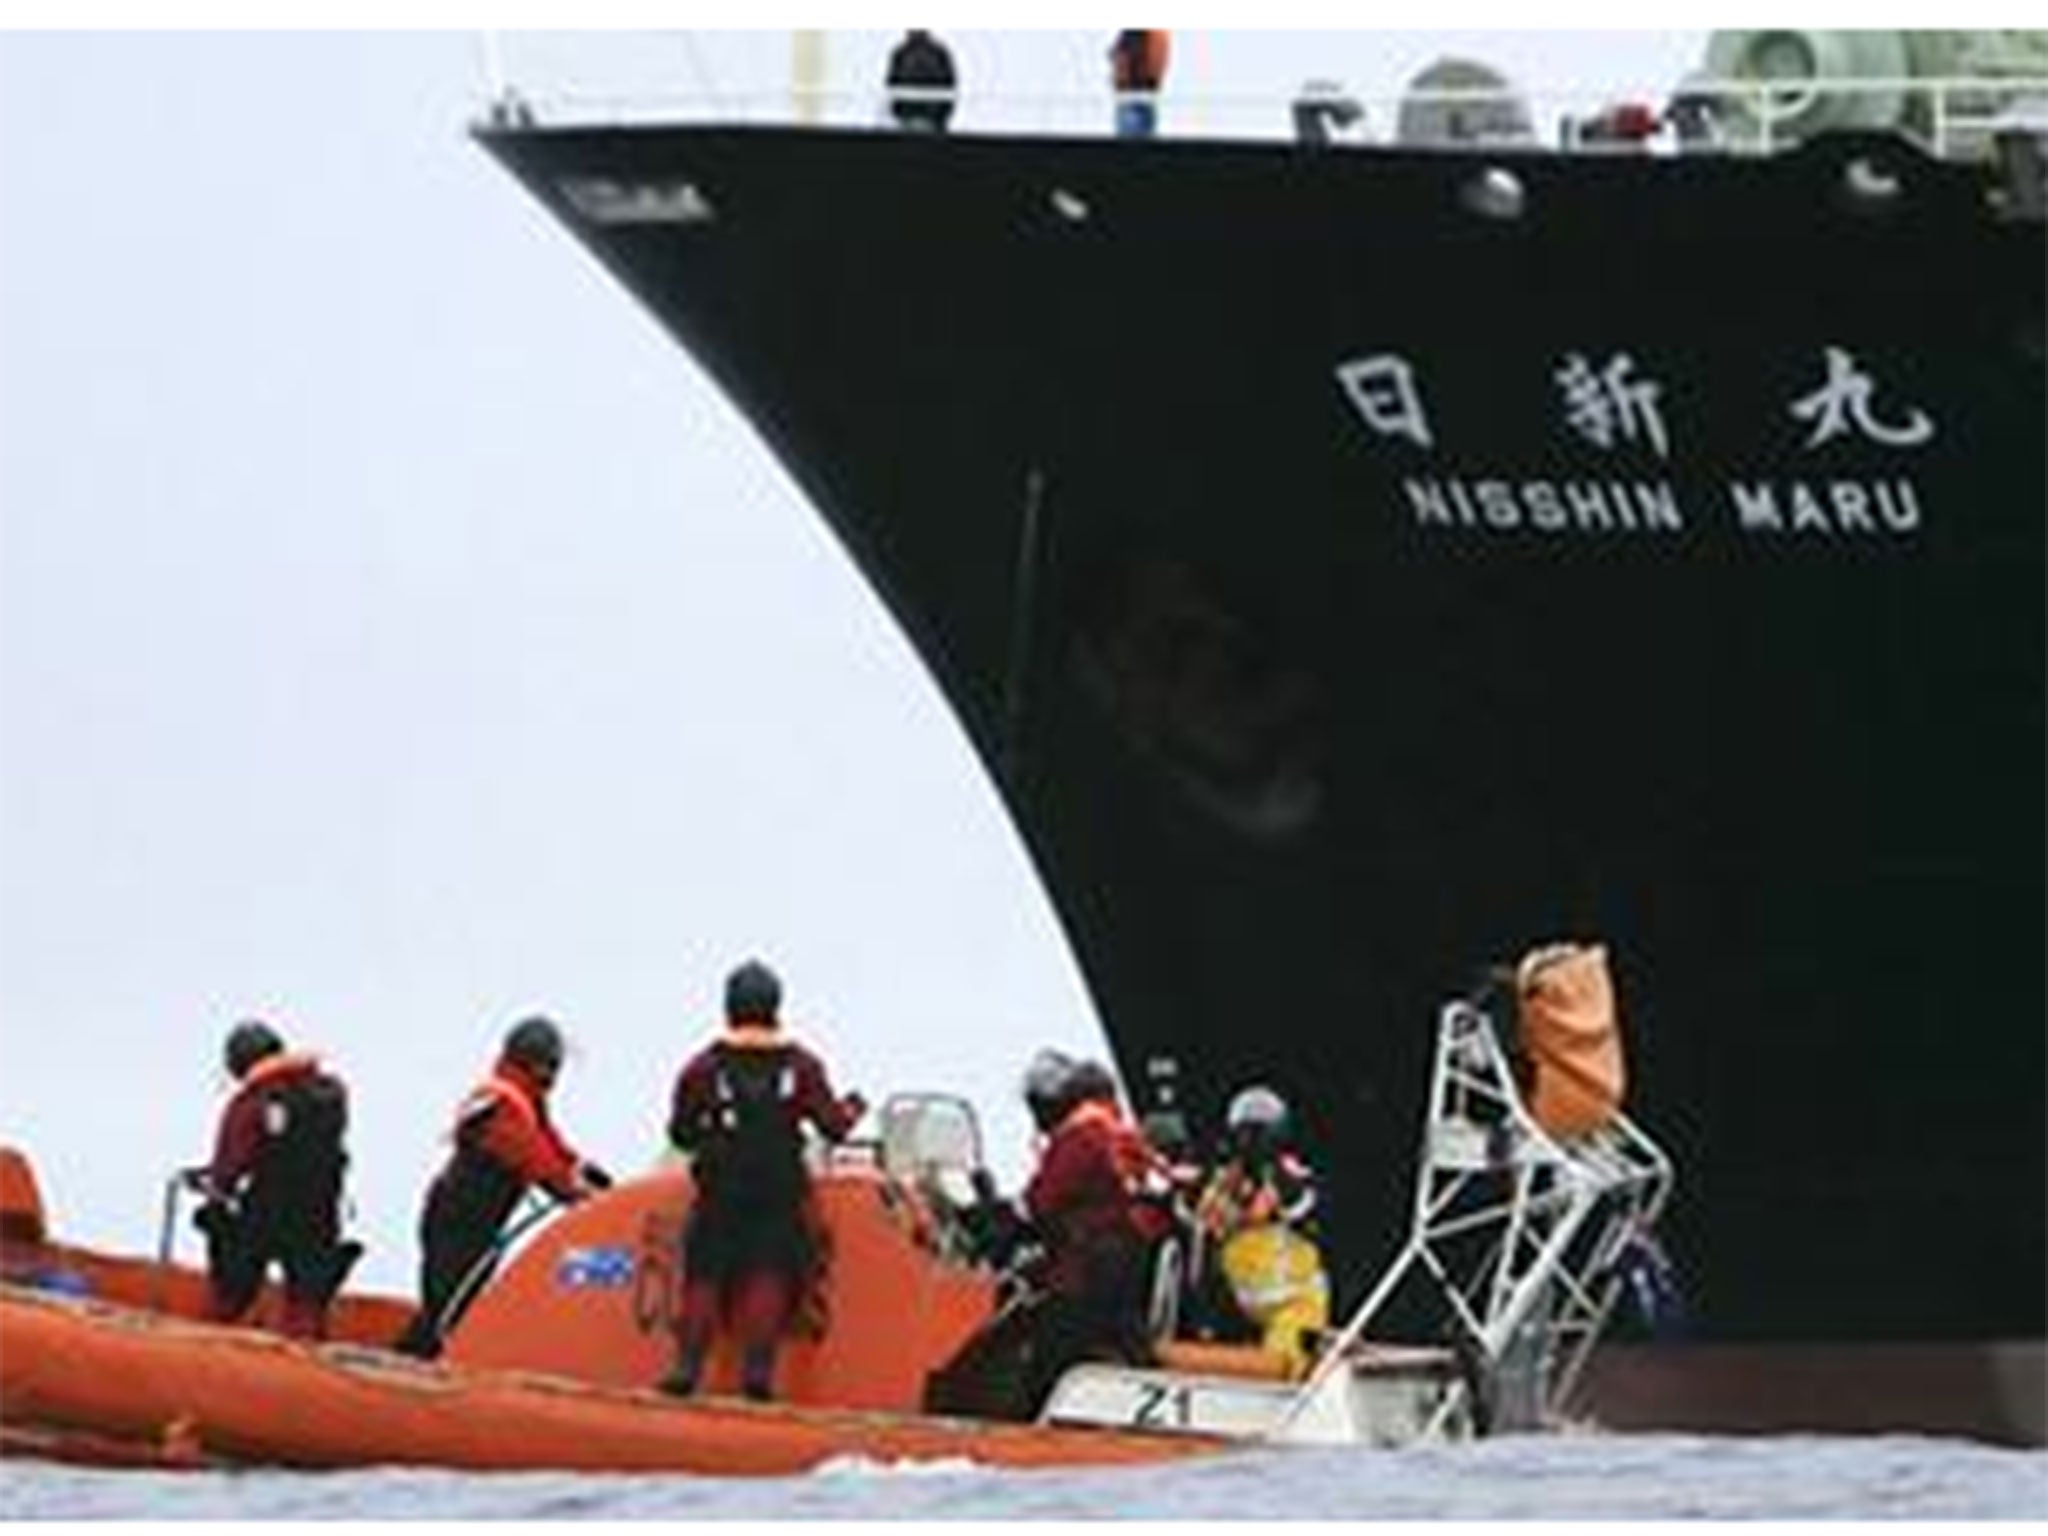 This picture supposedly showing the Japanese whaling ship the 'Nisshin Maru' was used with the World News Daily Report's story